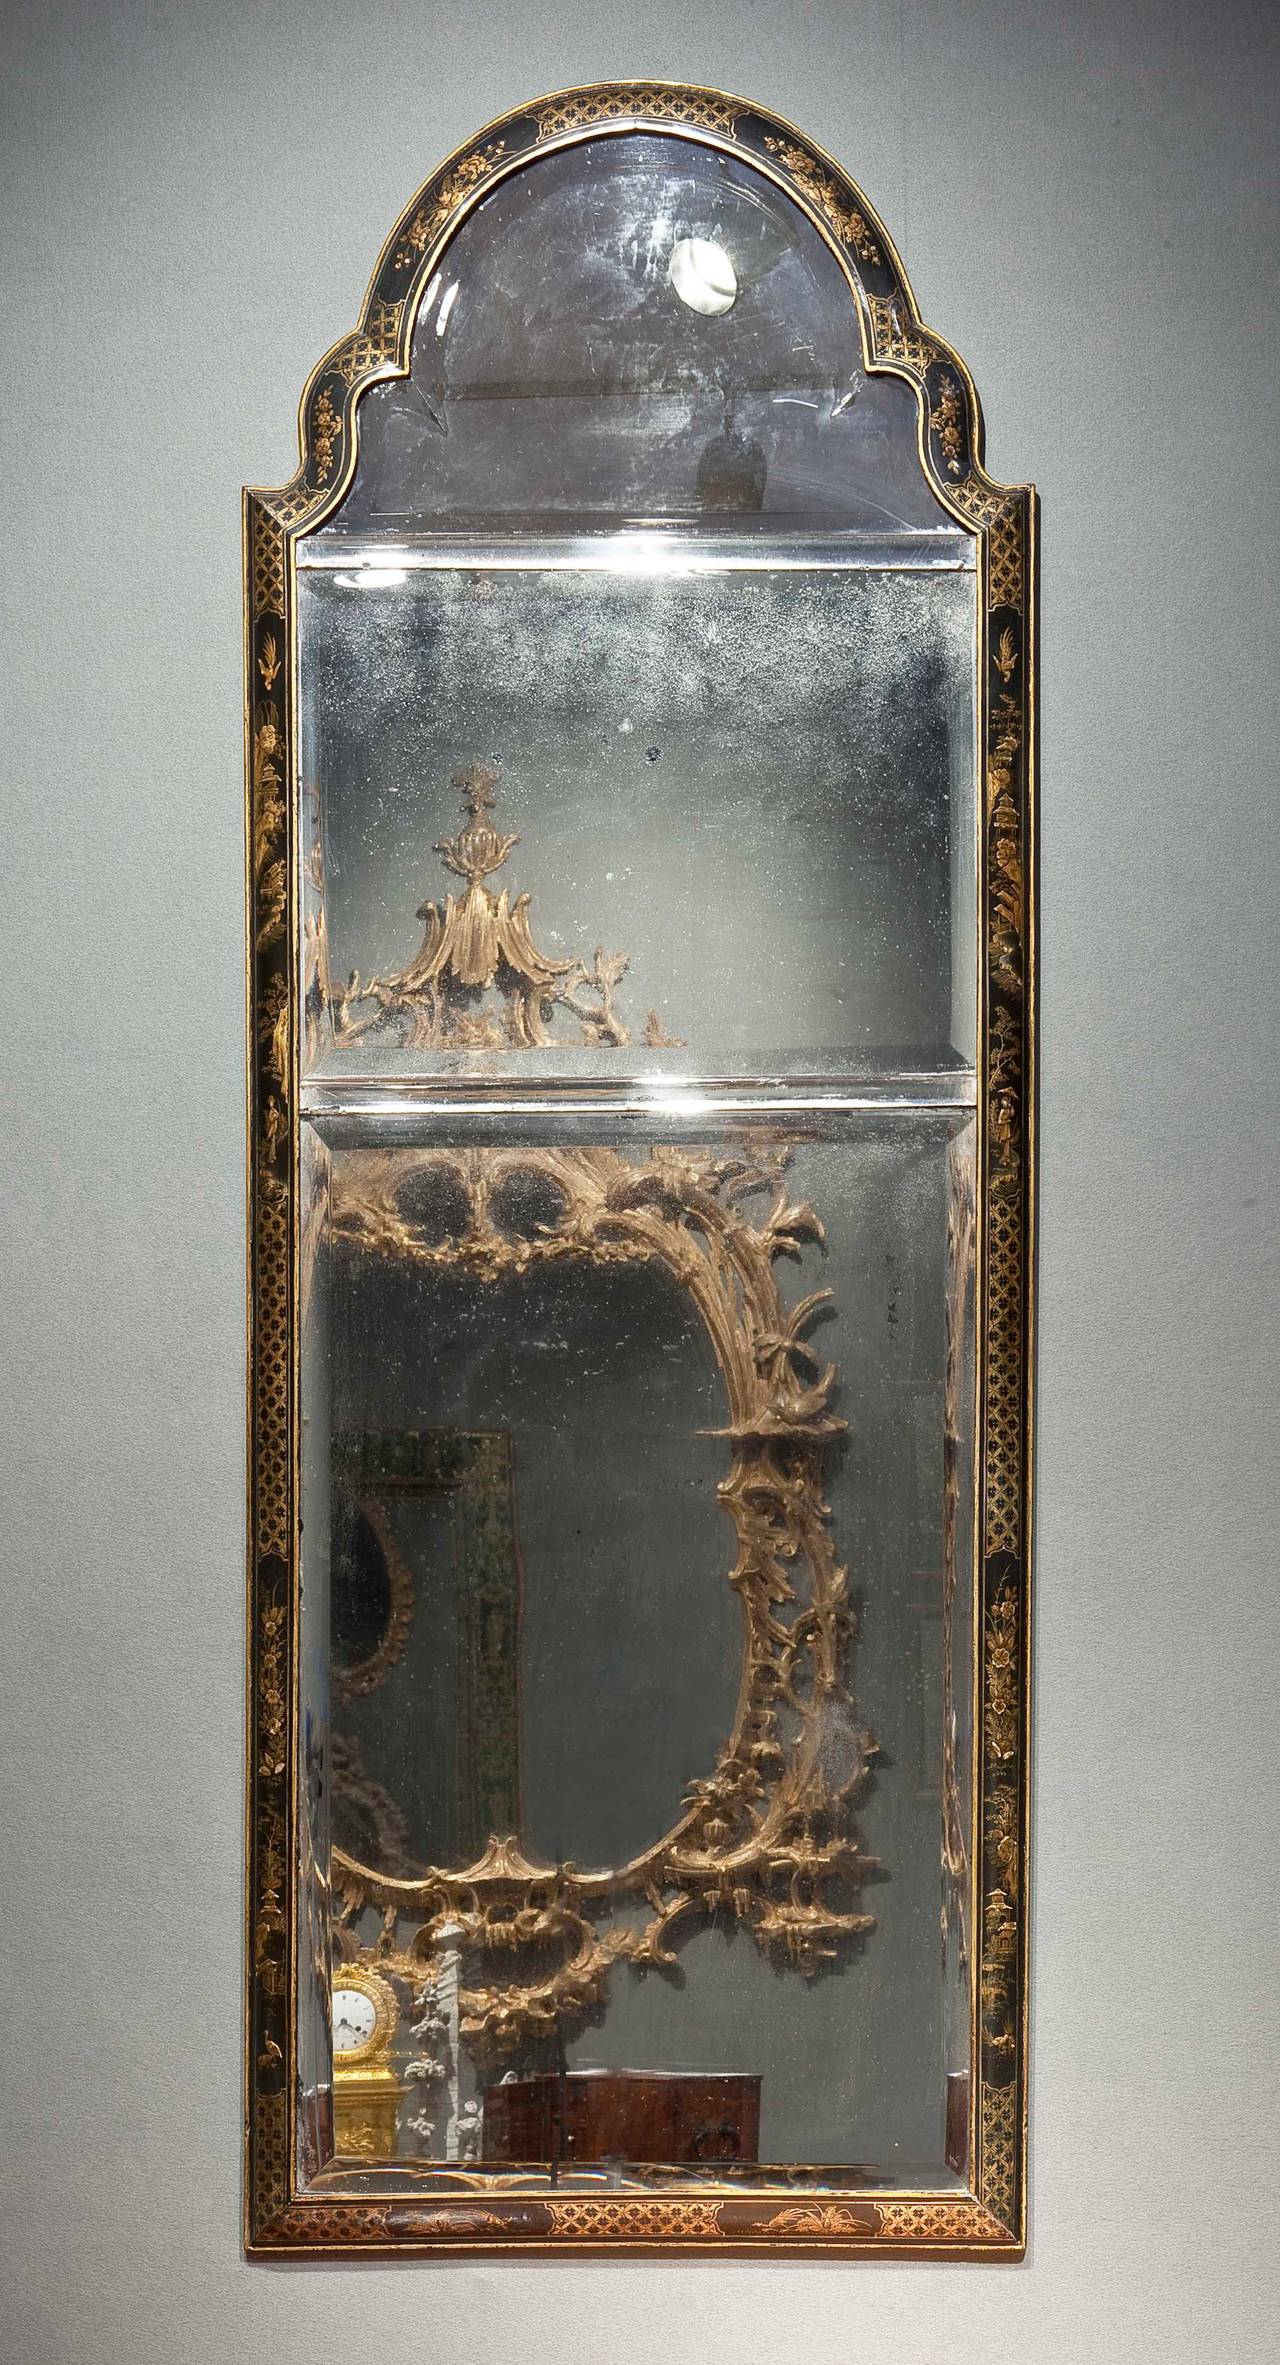 An elegant japanned chinoiserie mirror with an arched top and cushion frame with a bead around the exterior, having three re-silvered but original major beveled glass plates with two beveled glass bars separating the plates, touch-ups to decoration.